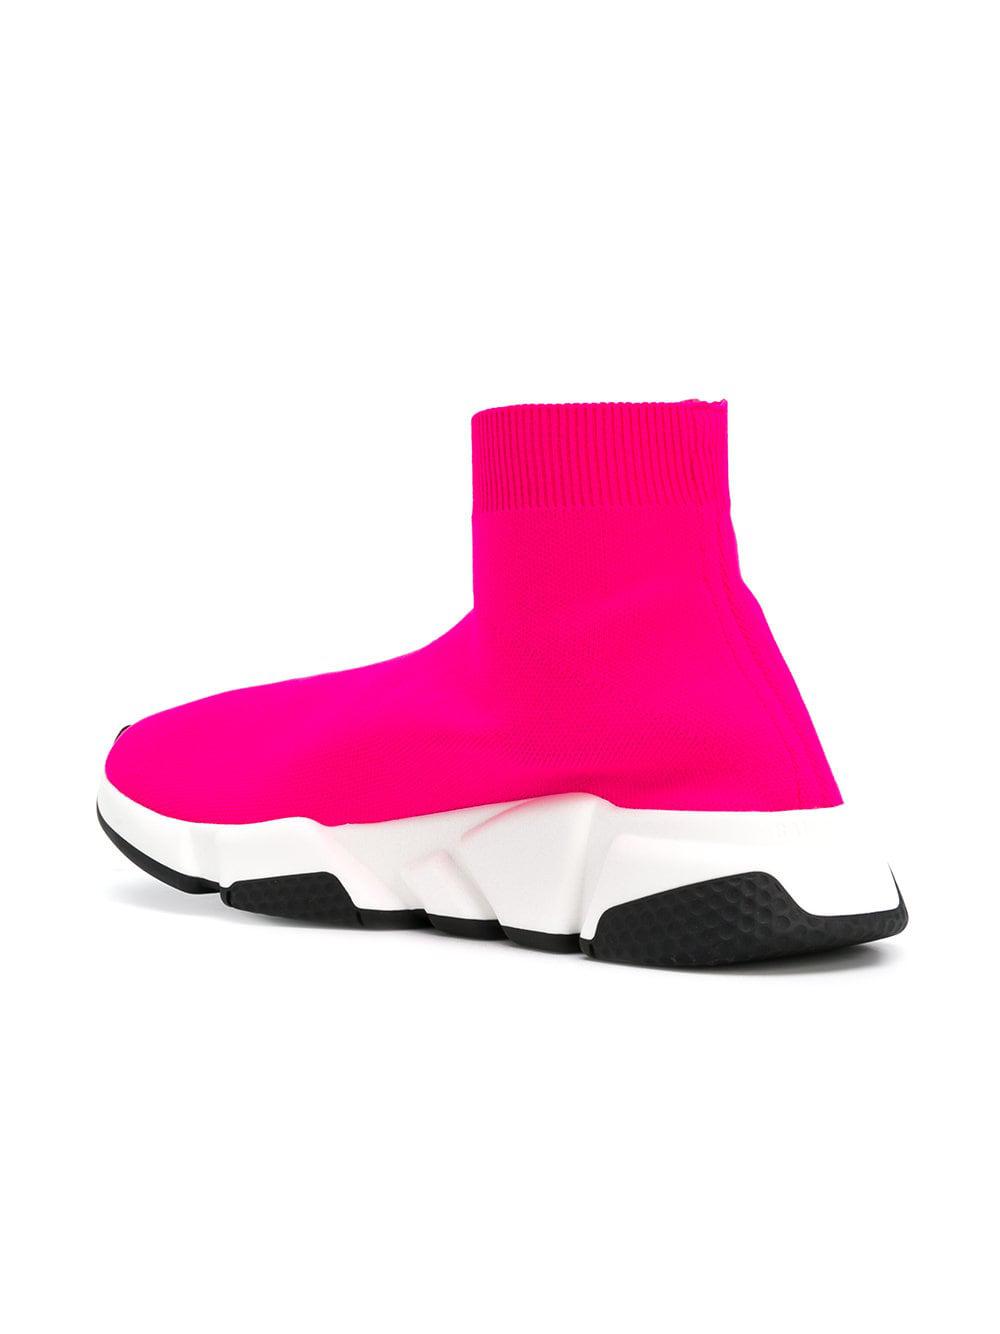 Balenciaga Synthetic Speed Trainers in Neon Pink (Pink) - Lyst